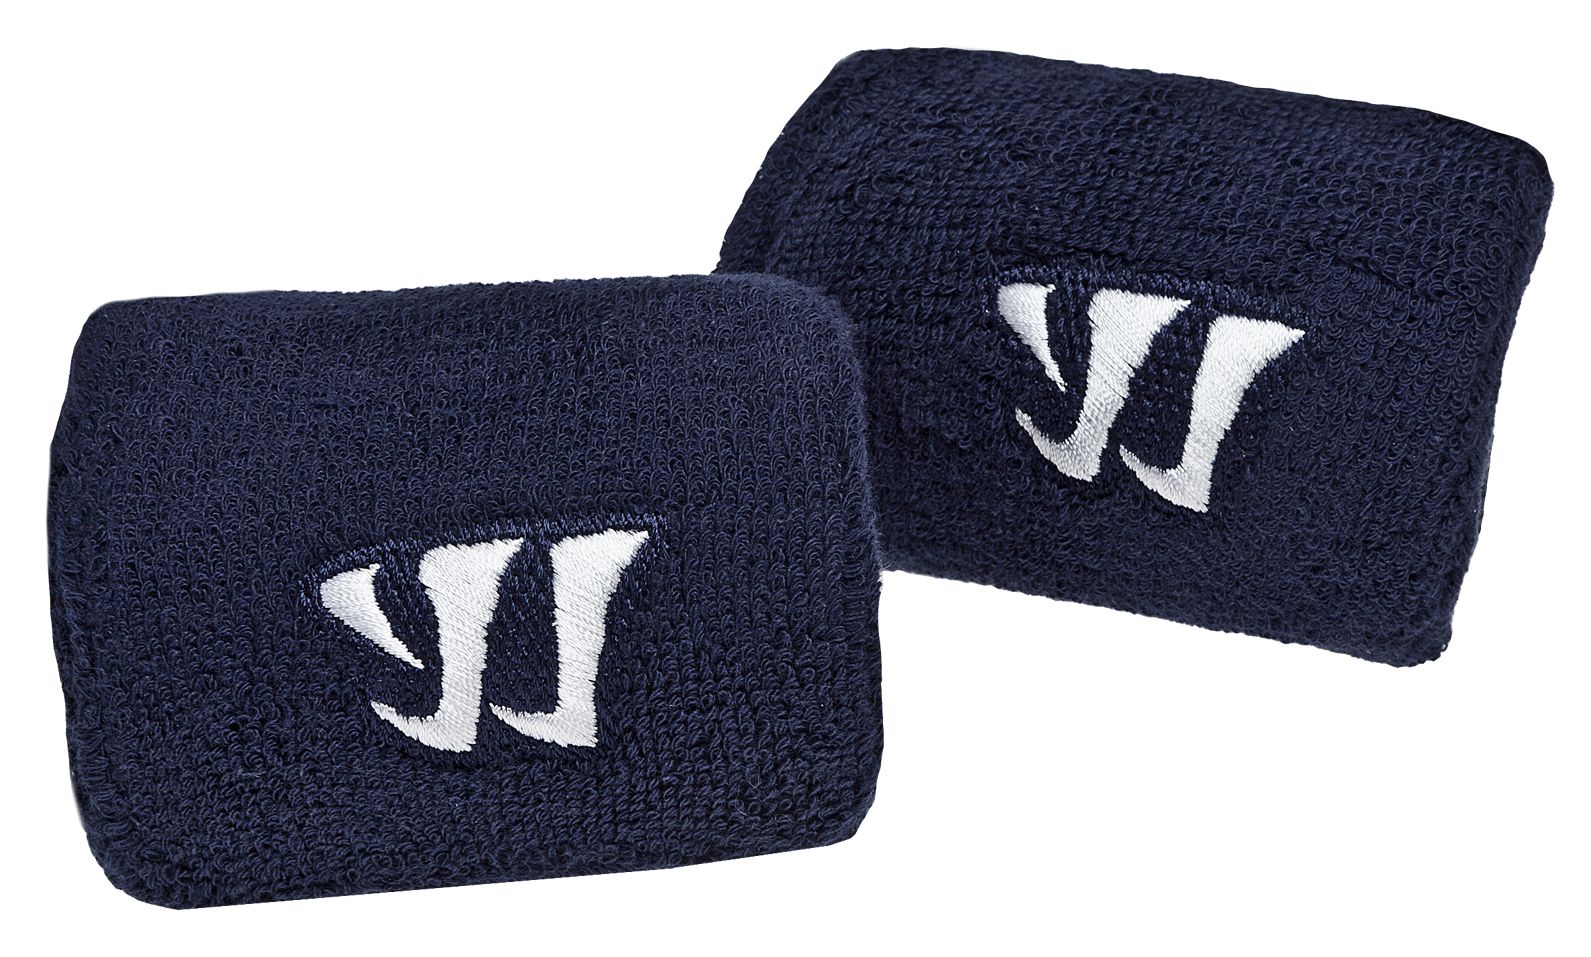 Cuff Slash Guards, Navy with White image number 0